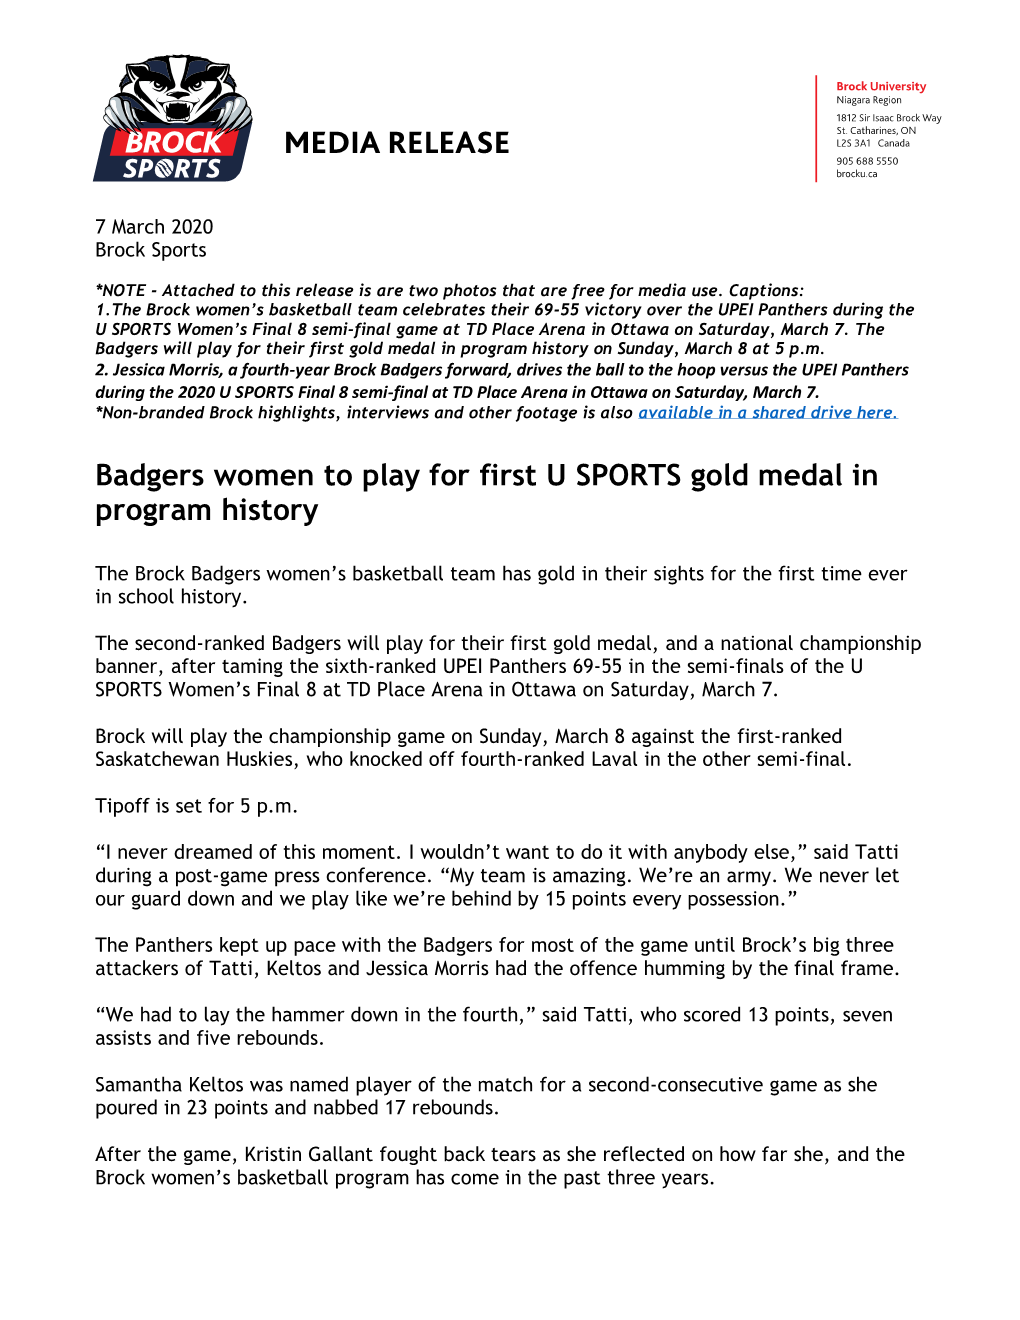 Badgers Women to Play for First U SPORTS Gold Medal in Program History